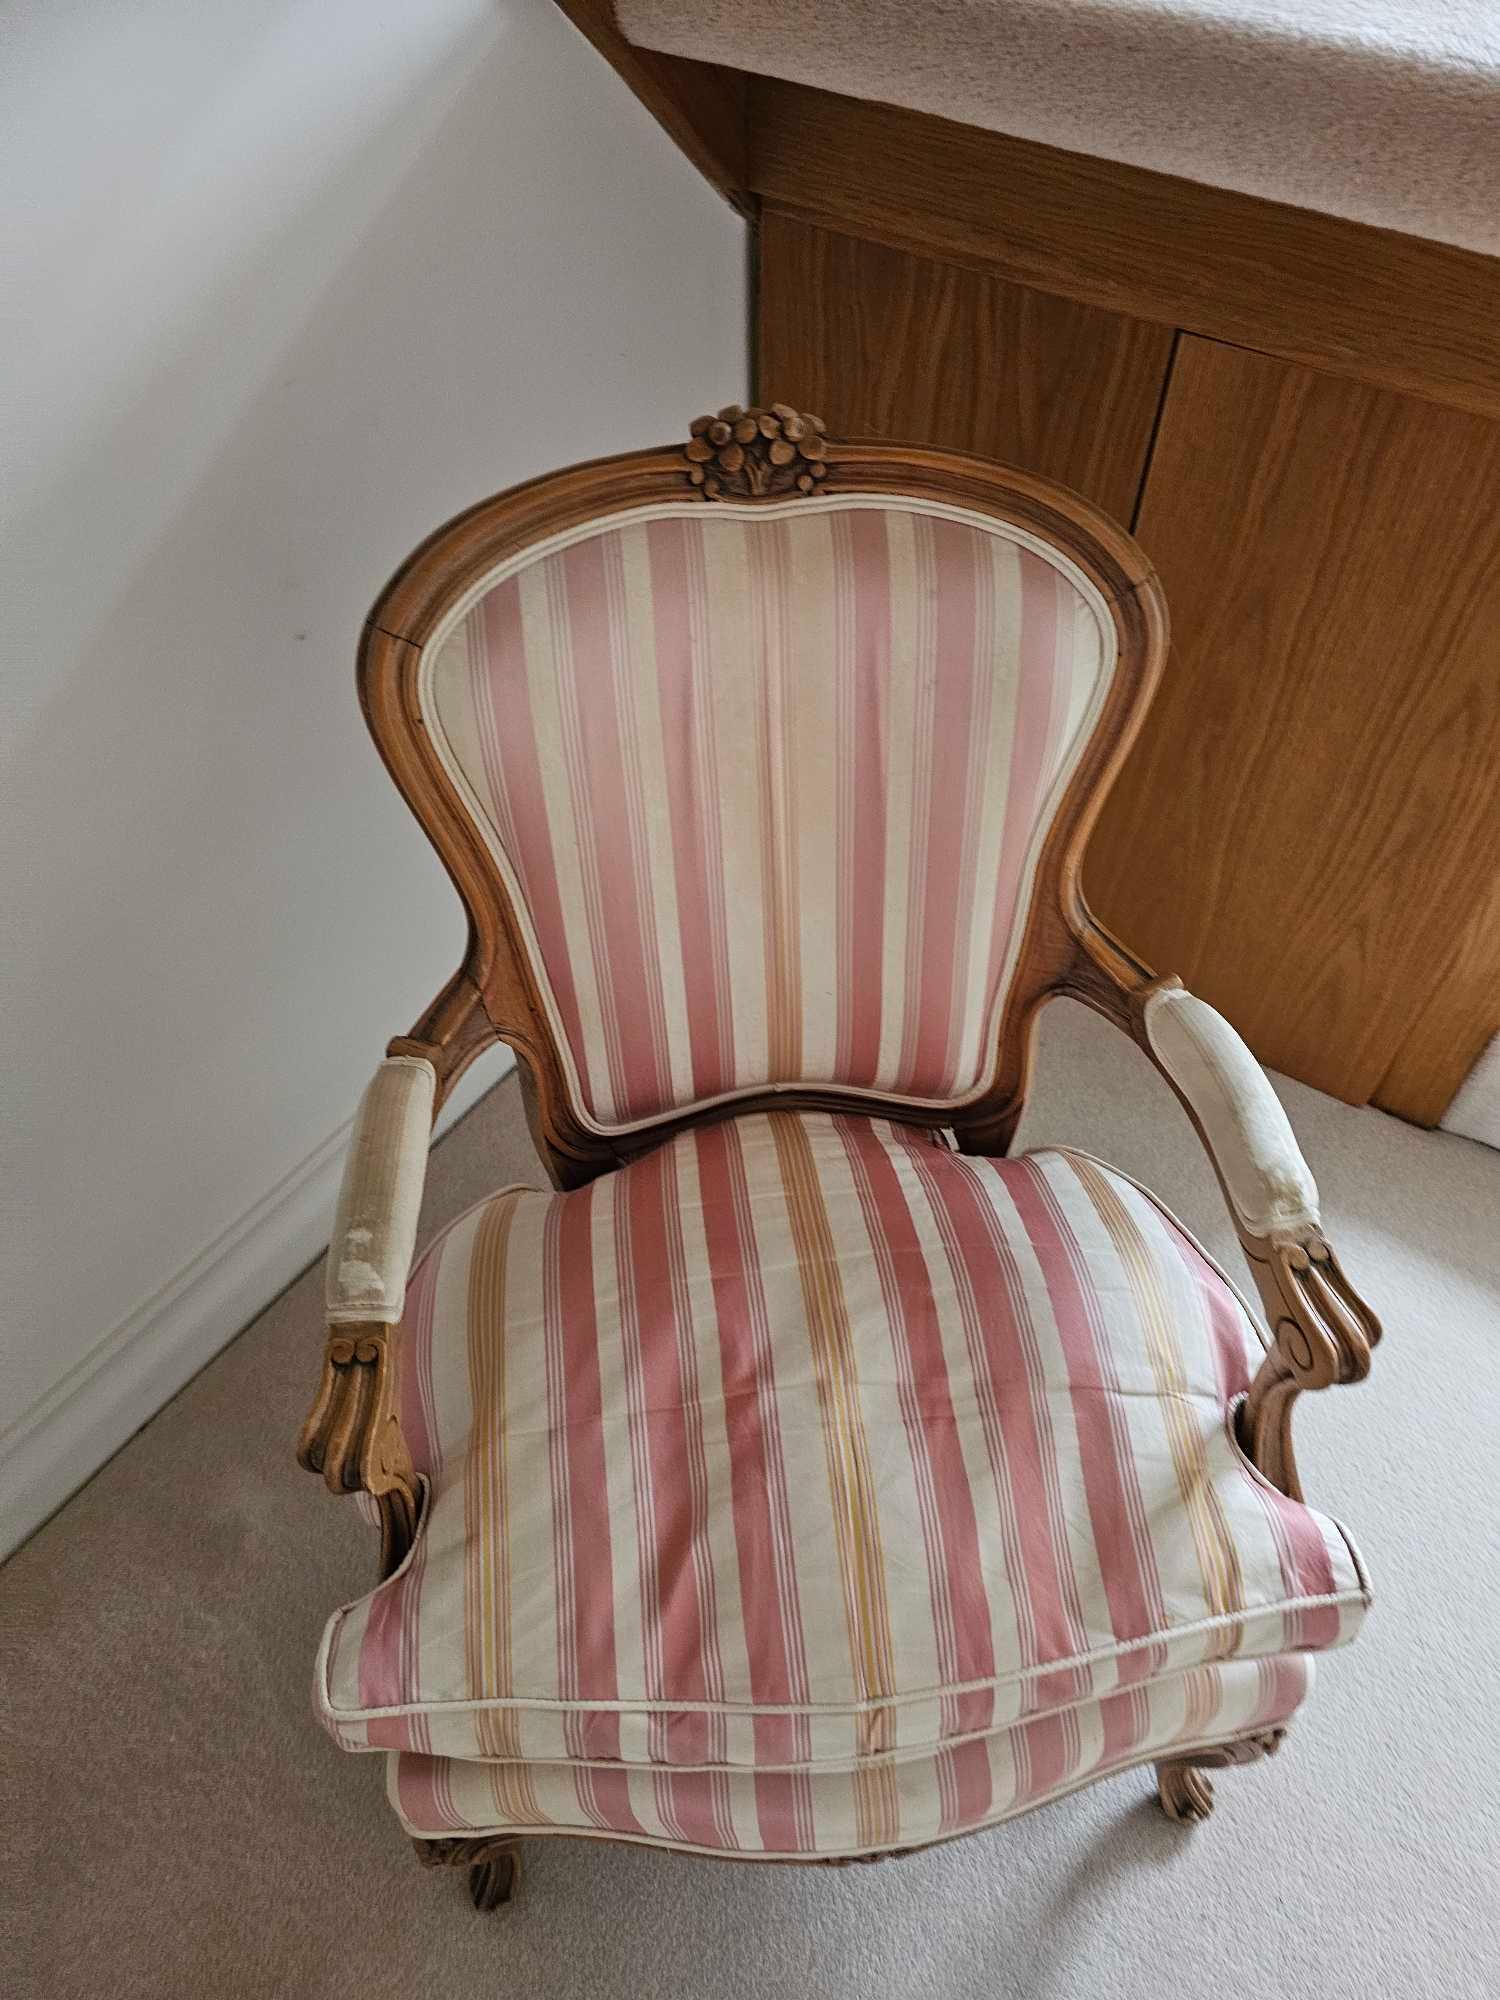 A Louis XV Style Beechwood Fauteuil The Shaped Rectangular Back With Floral Cresting, Striped - Image 5 of 5